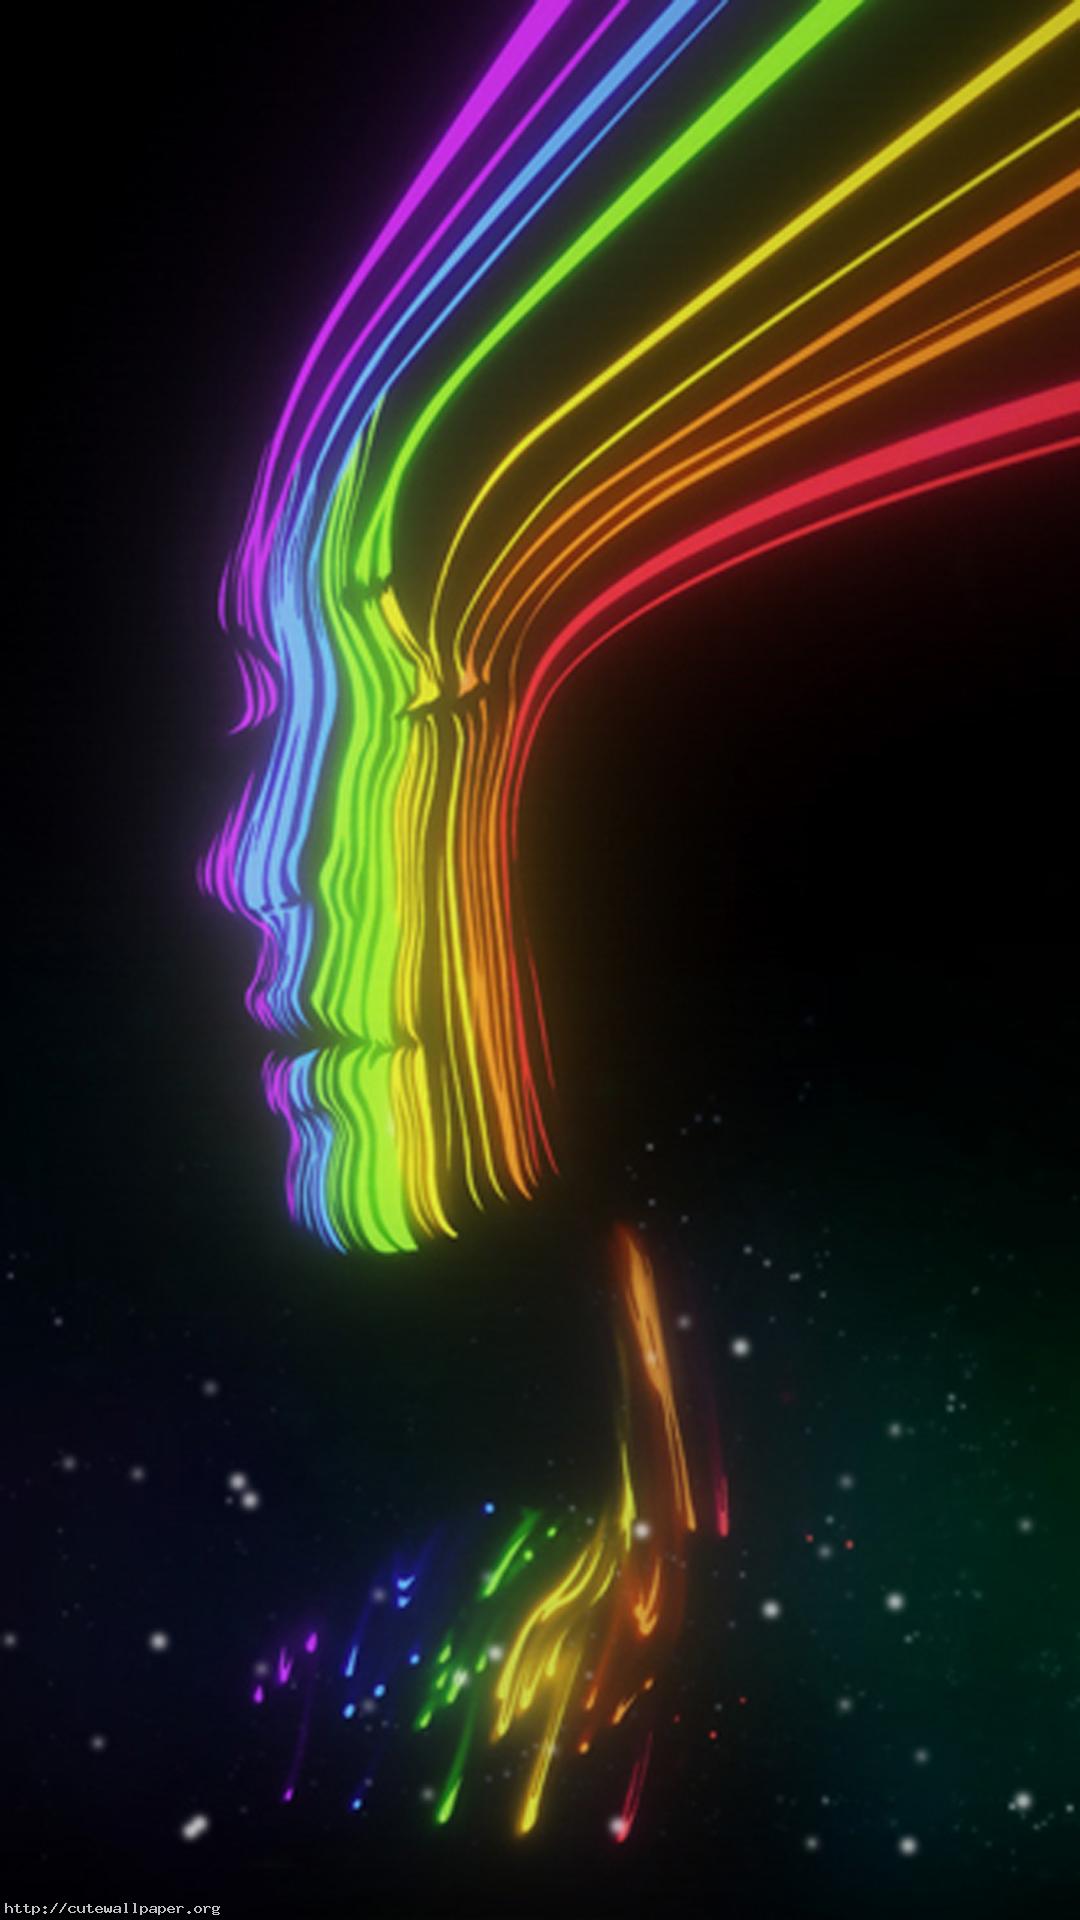 Download Live Wallpaper Gallery - Synchronicity Is A Wink From The Universe - HD Wallpaper 